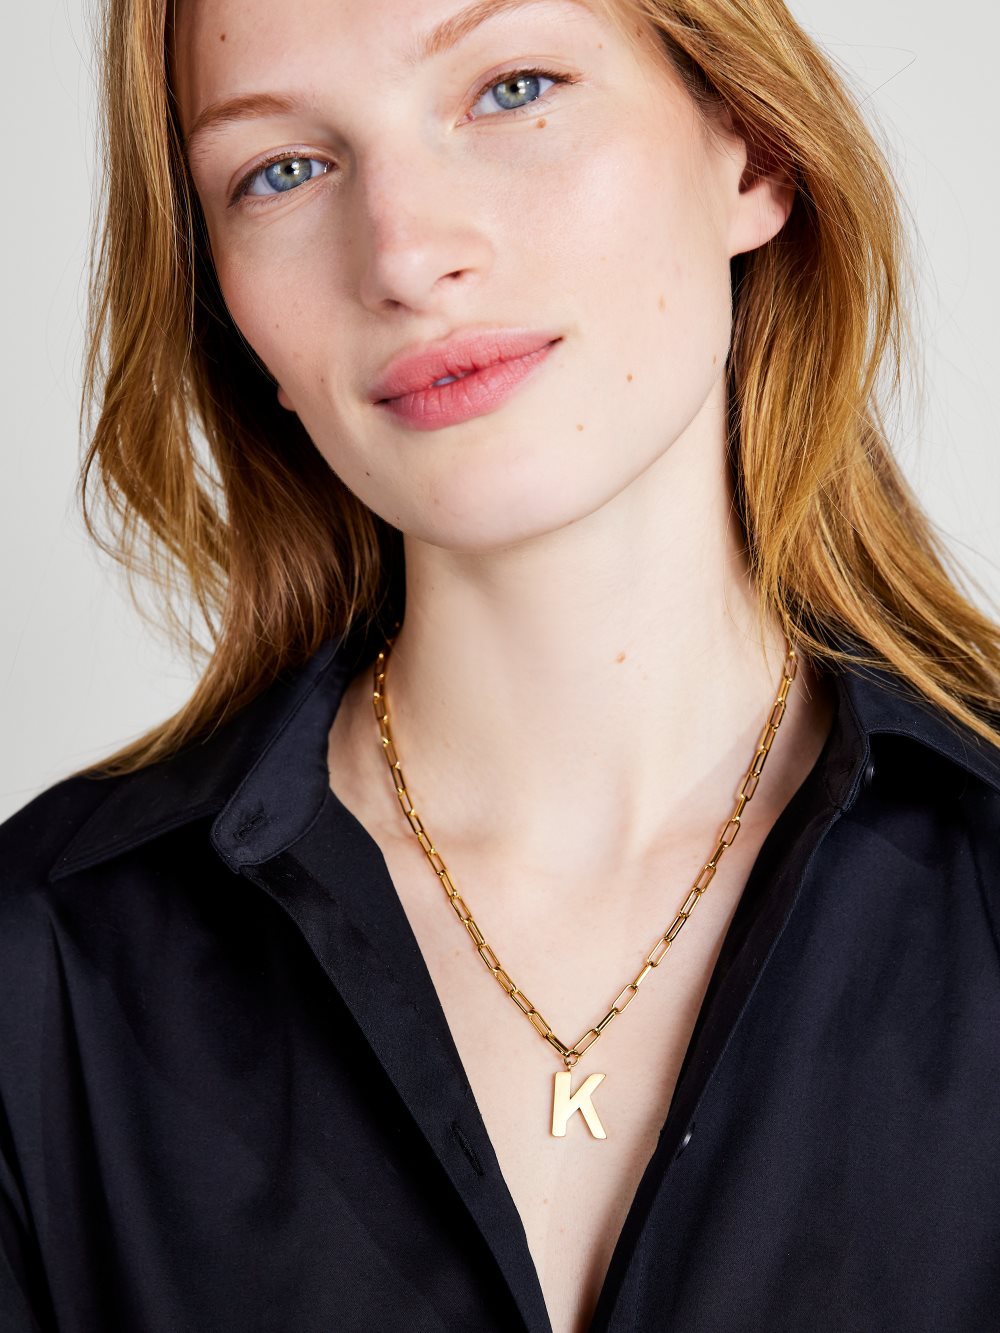 Women's gold. e initial this pendant | Kate Spade